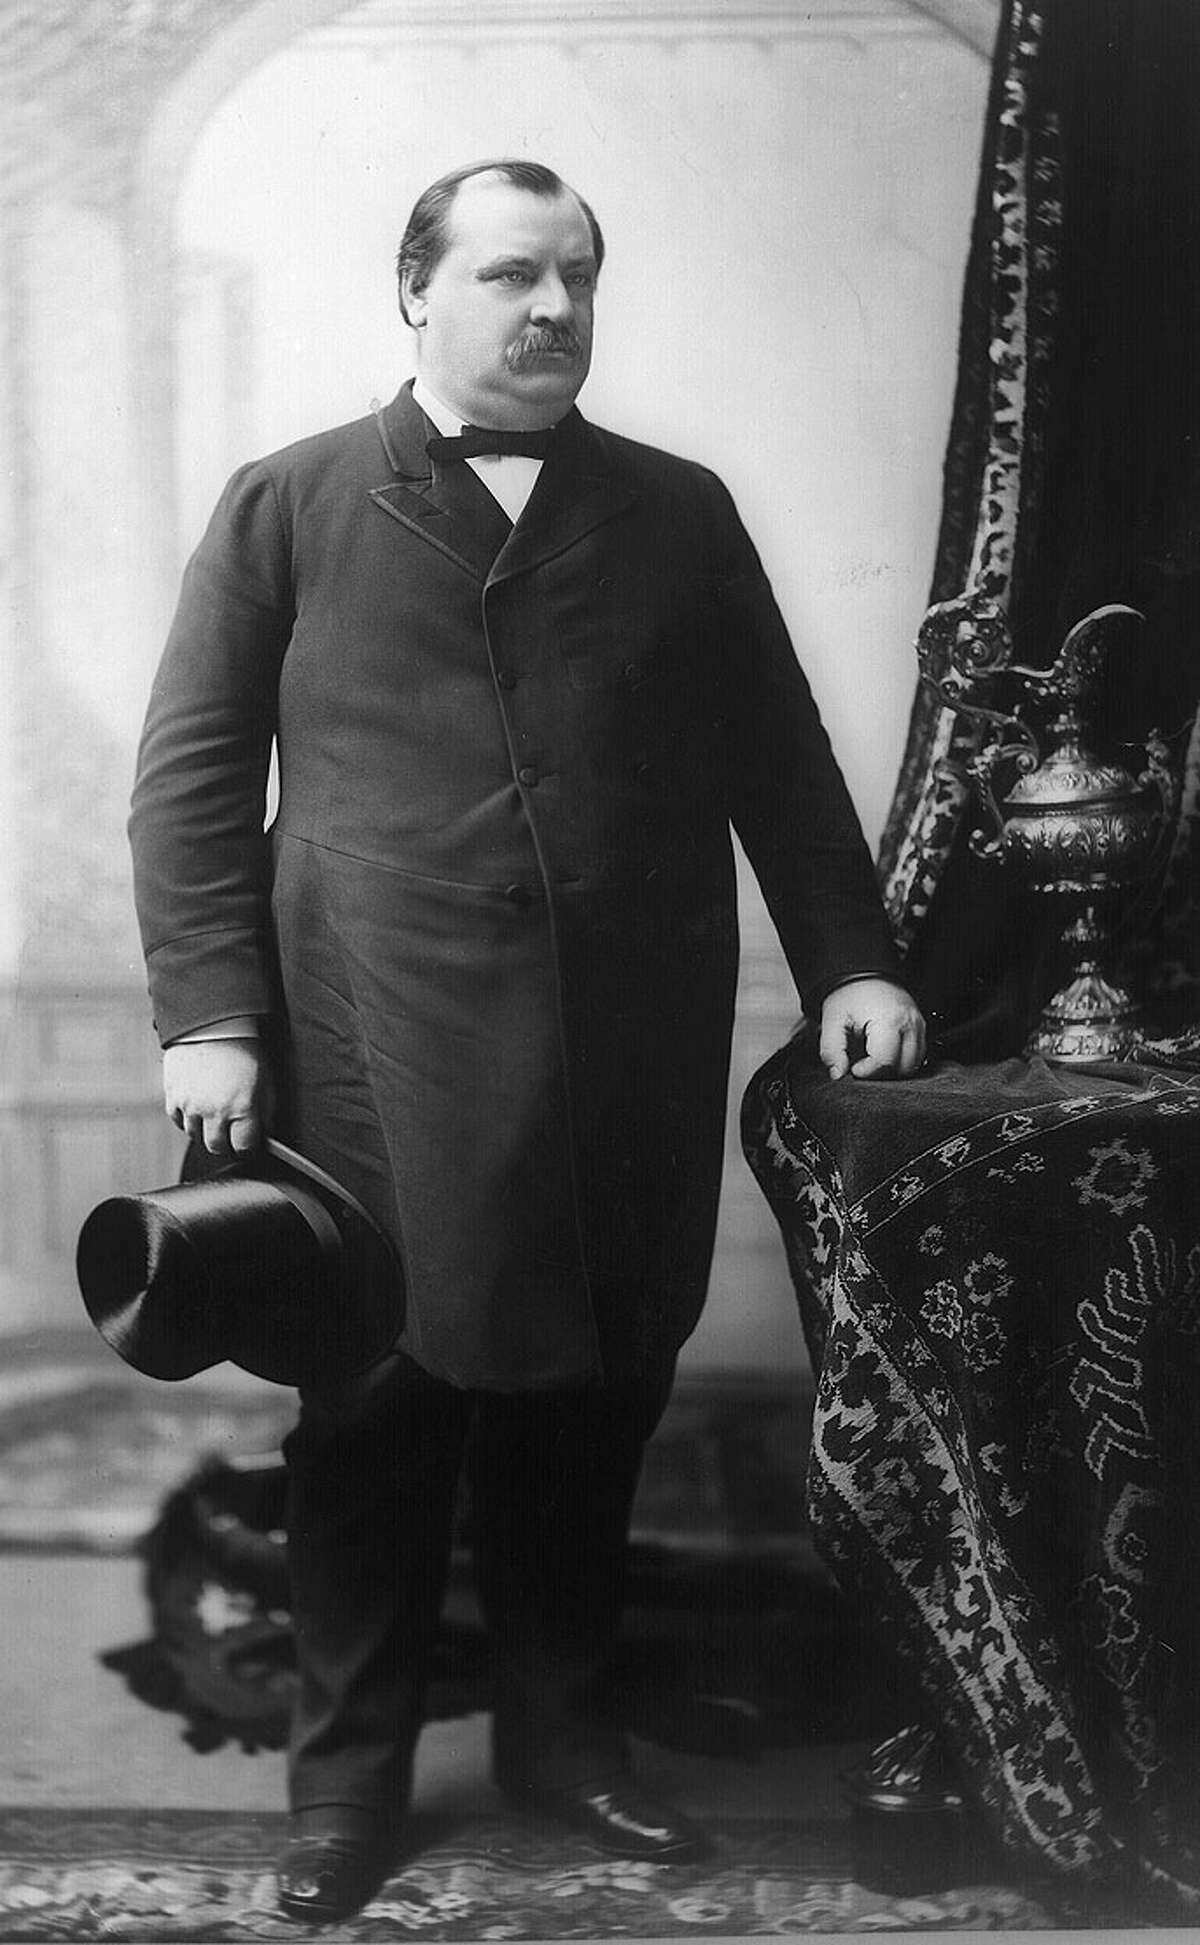 1893: When President Grover Cleveland learned that a lump inside his mouth was actually oral cancer, he decided to keep it secret, having the surgery on a friend’s yacht during a trip promoted to public as a pleasure cruise.